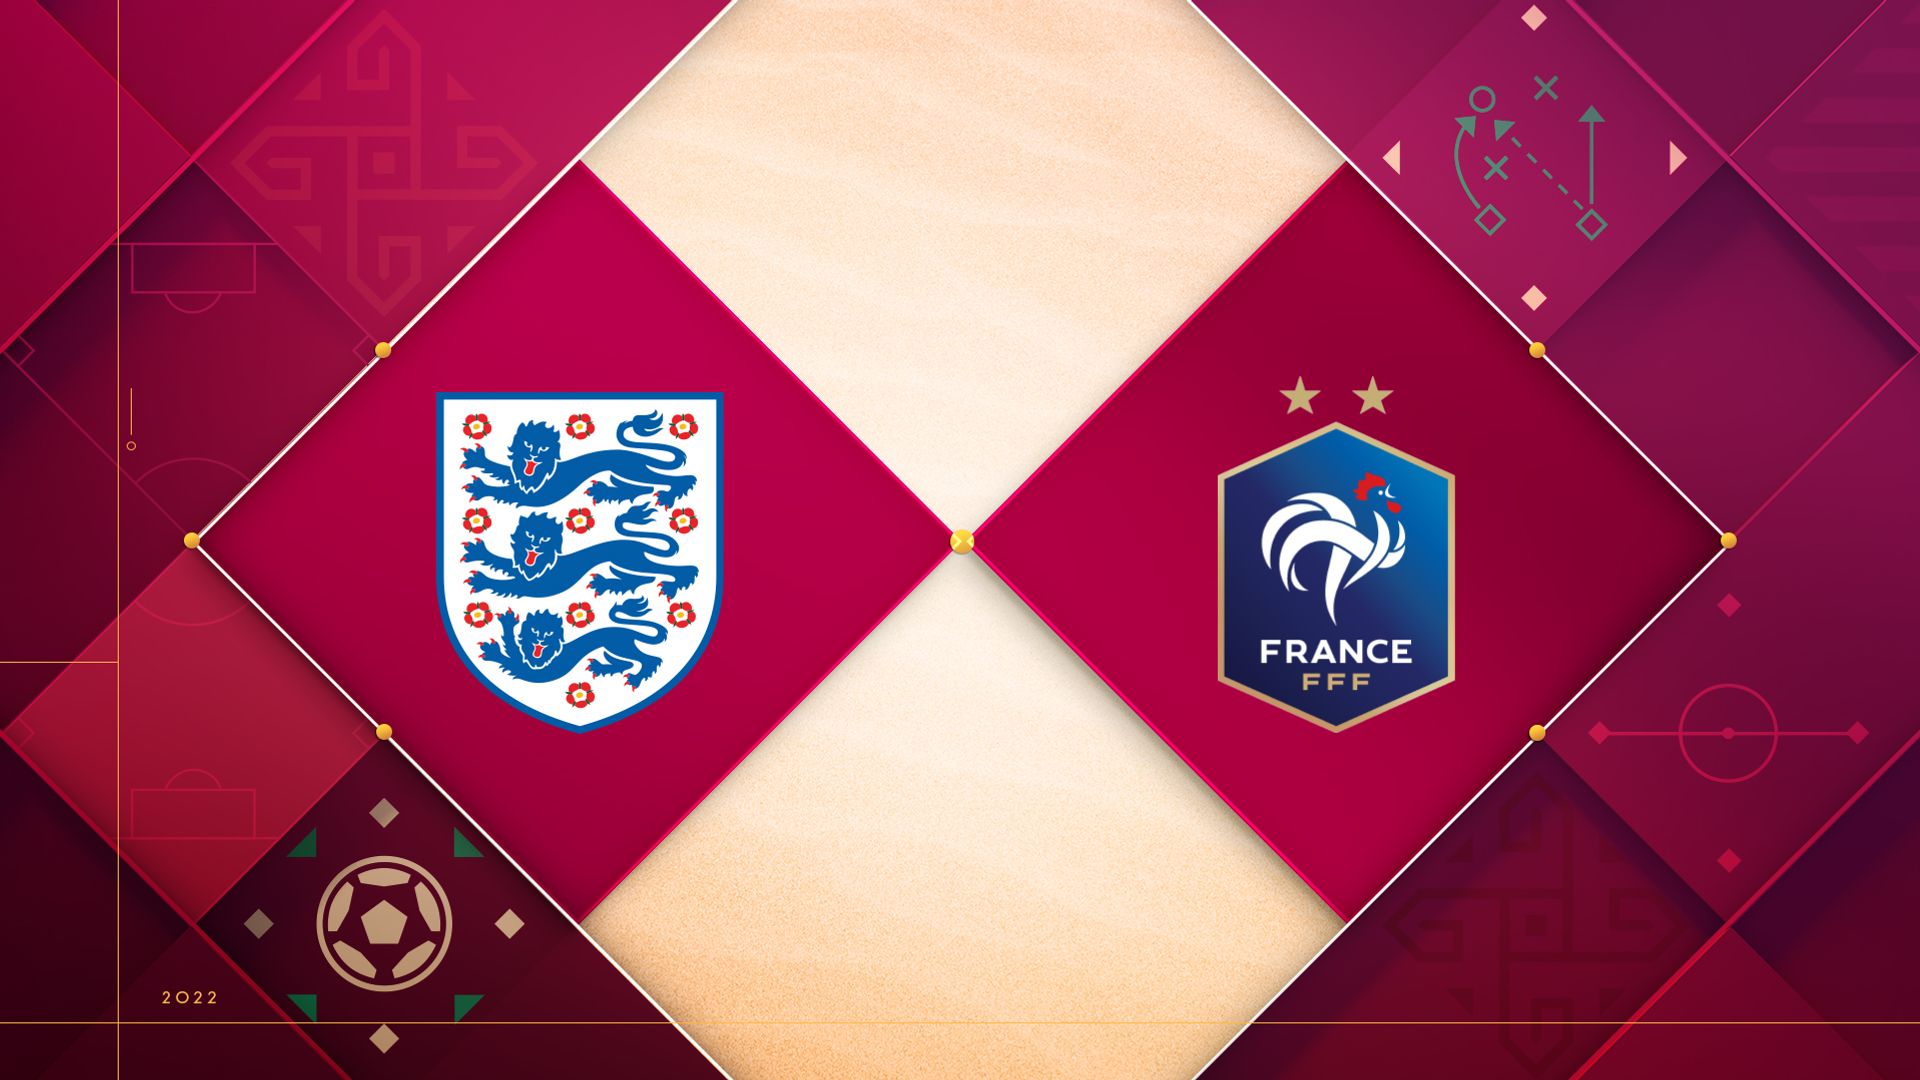 England vs France quiz - test your knowledge